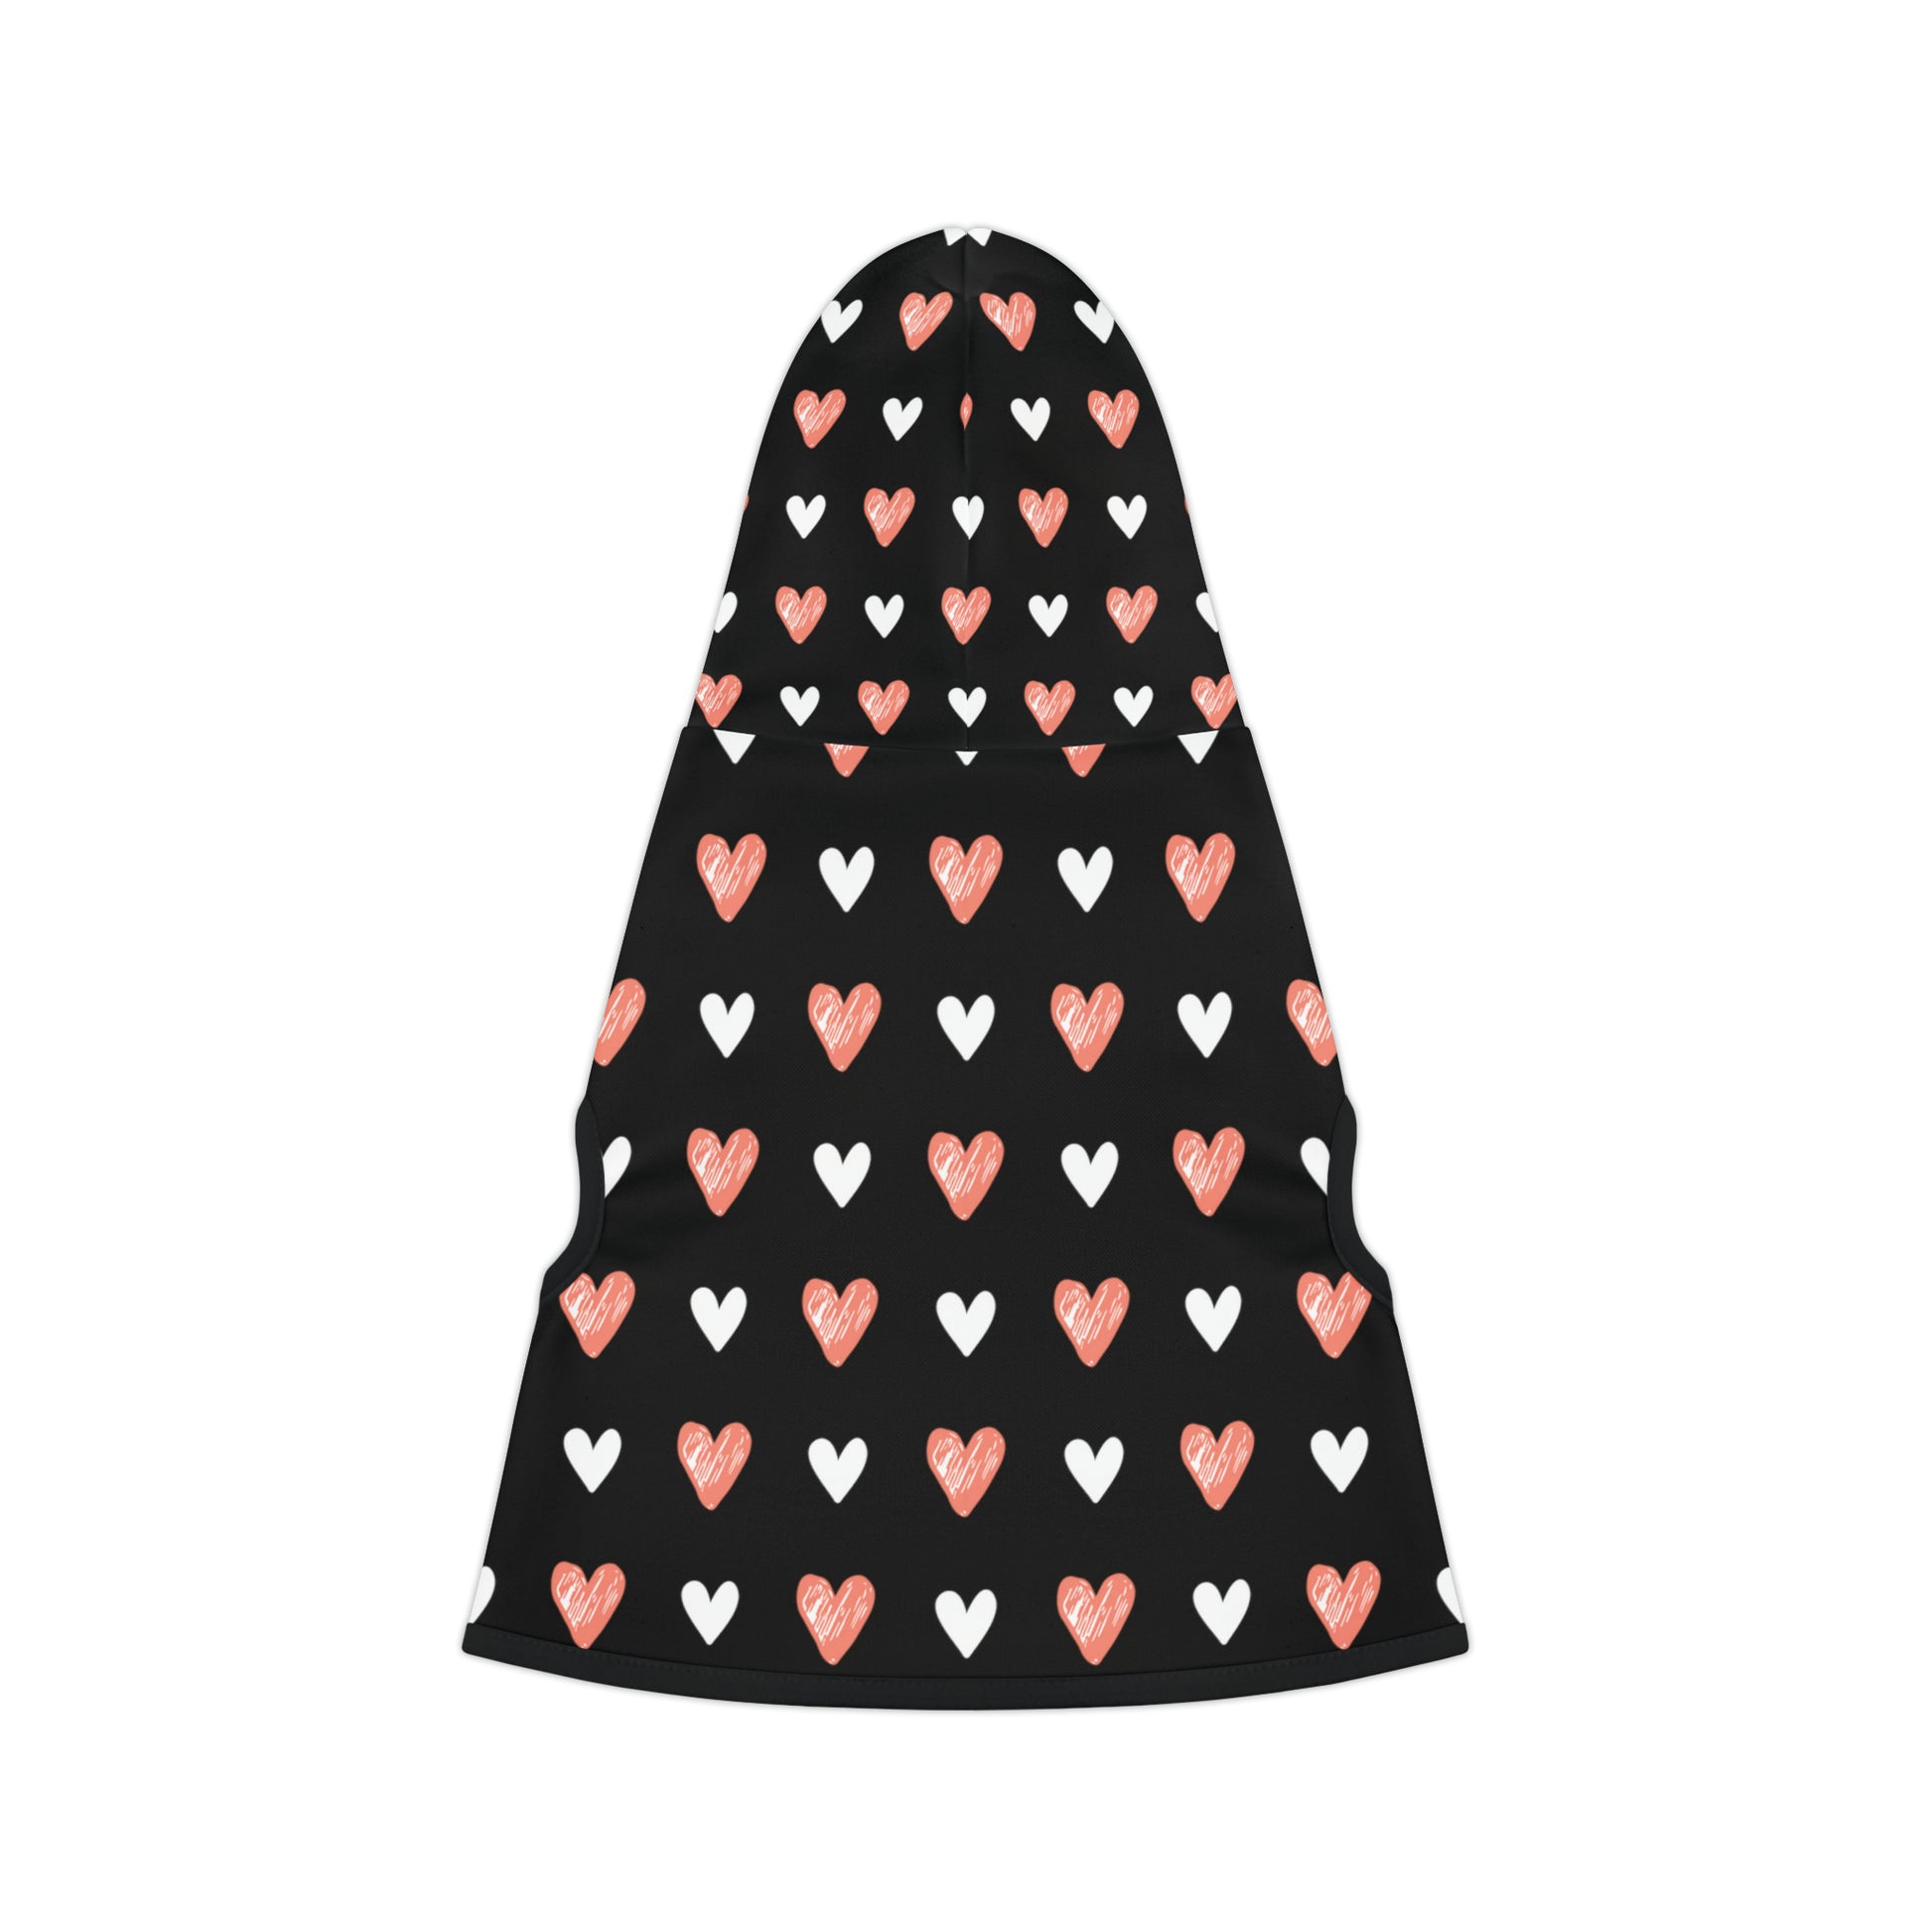 a pet hoodie with a beautiful hearts pattern design. Hoodie's Color is black